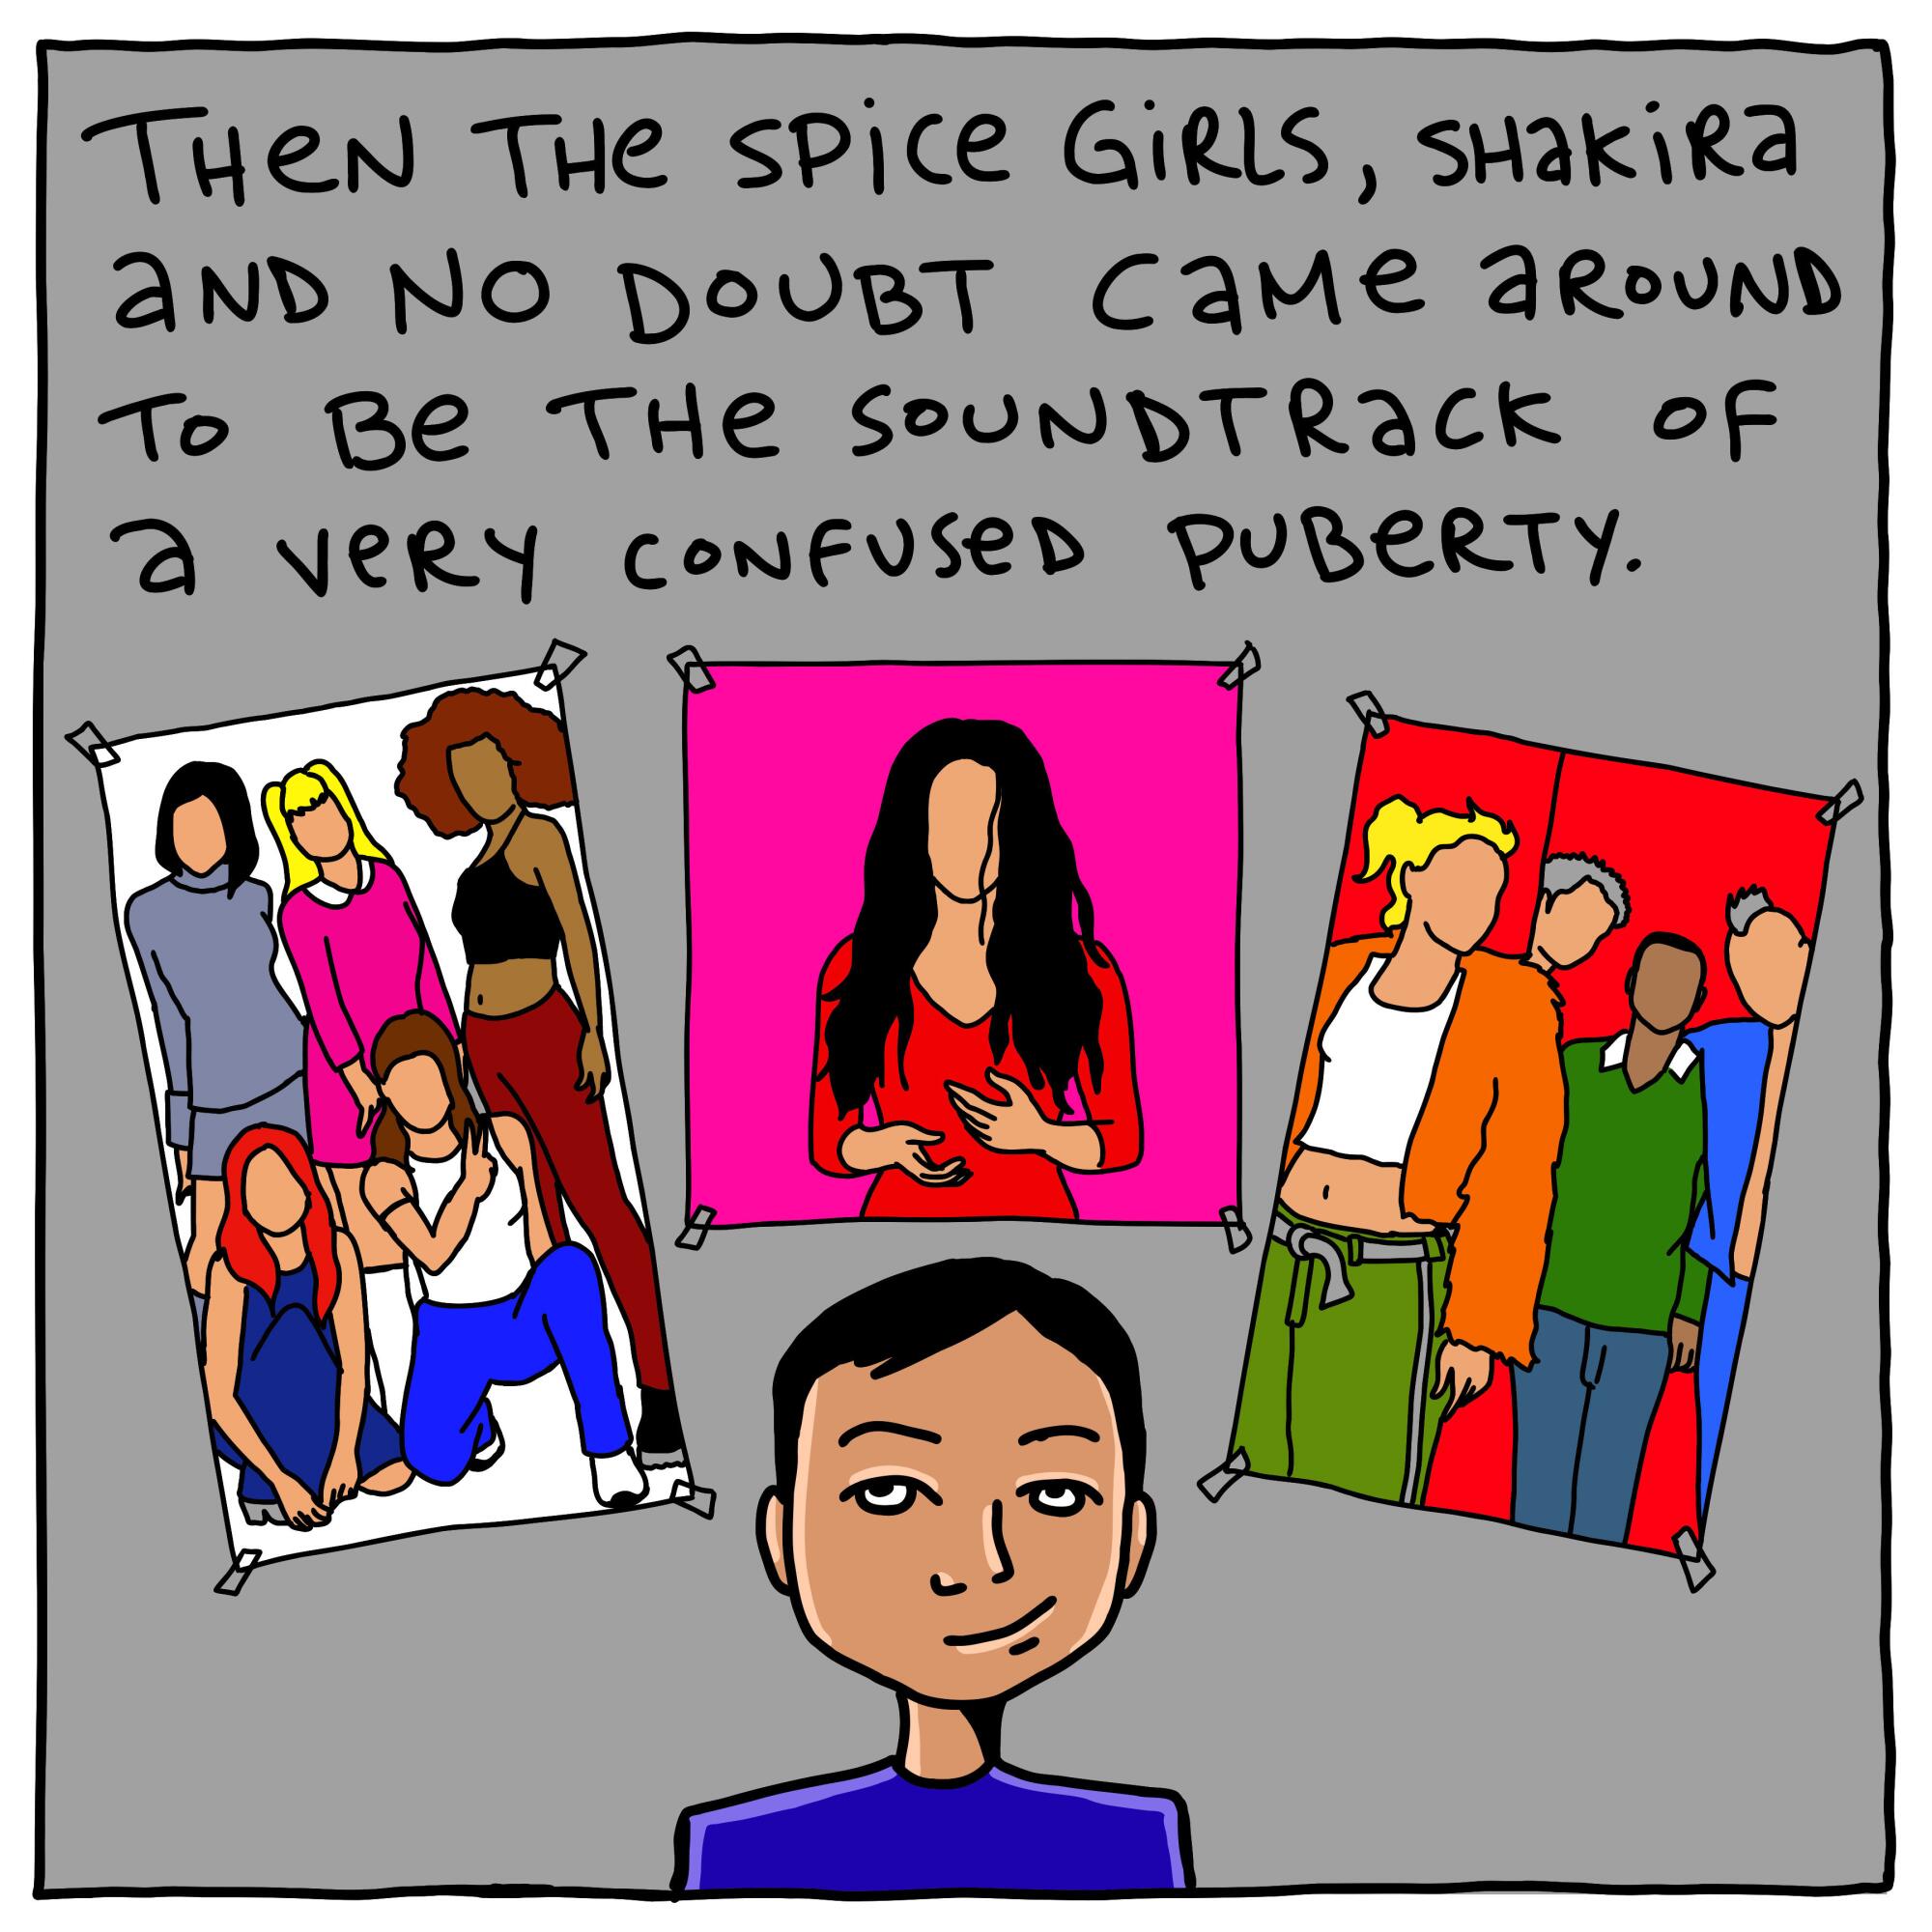 Boy and band posters, Then the Spice Girls, Shakira and No Doubt came around to be the soundtrack of a very confused puberty